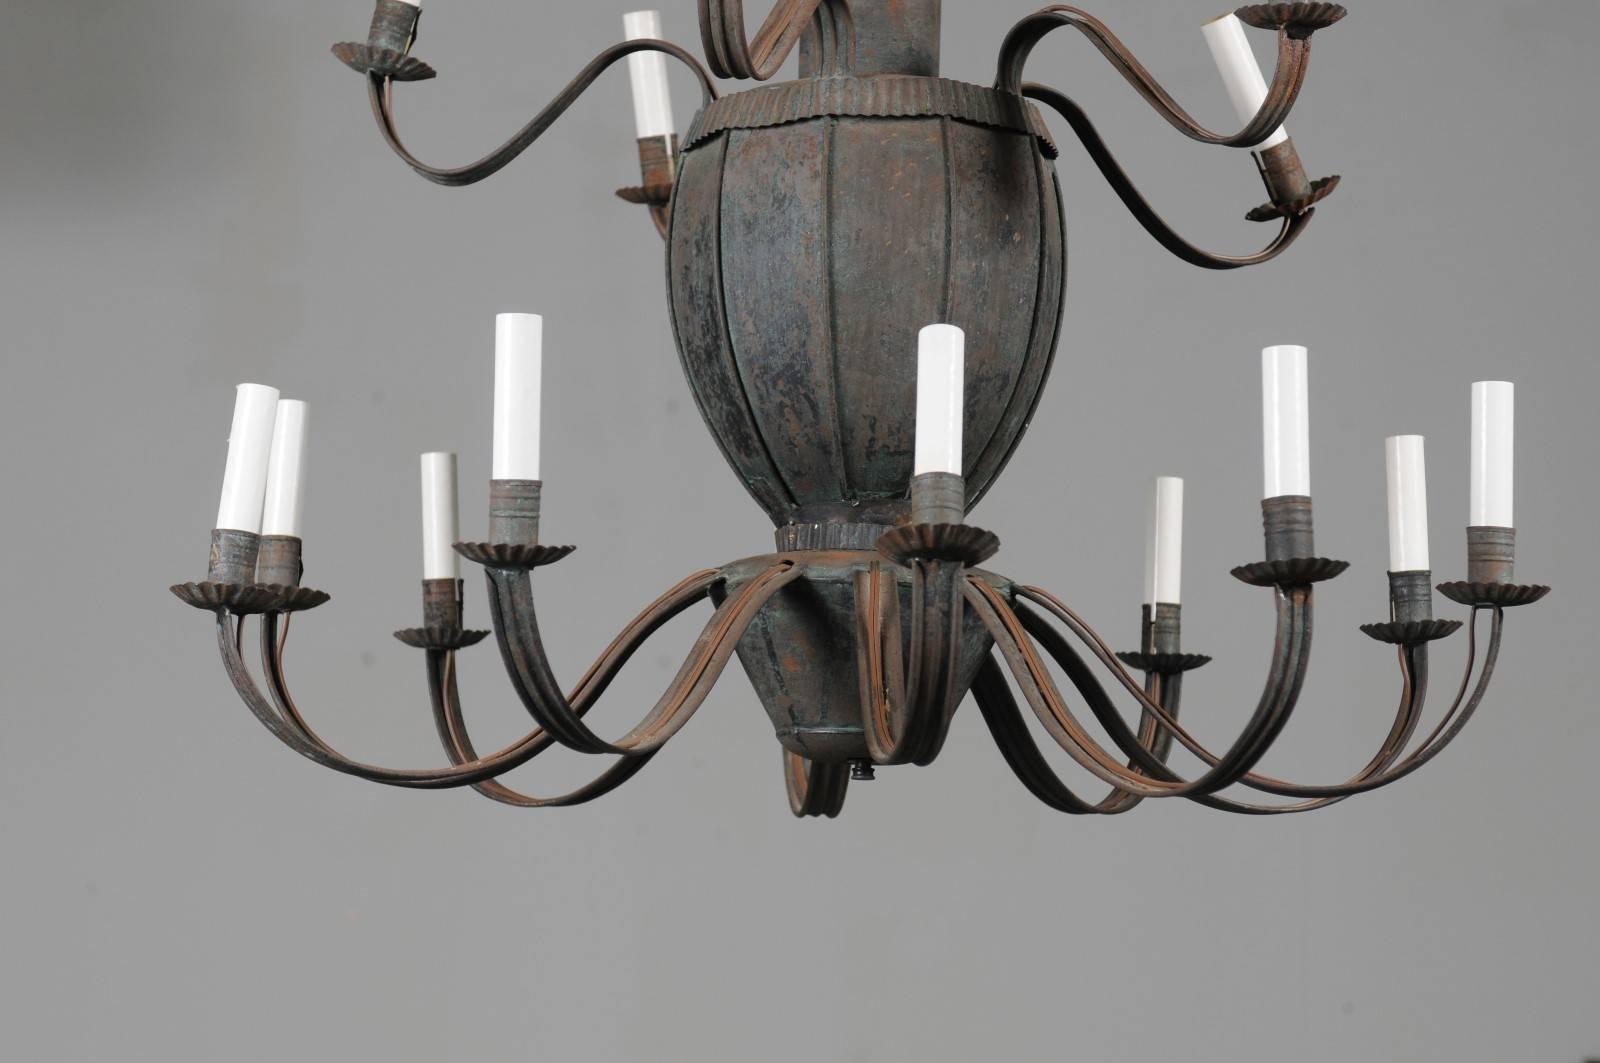 Tôle Unusual French 14-Light Painted Tole Chandelier with Scrolled Arms and Leaves